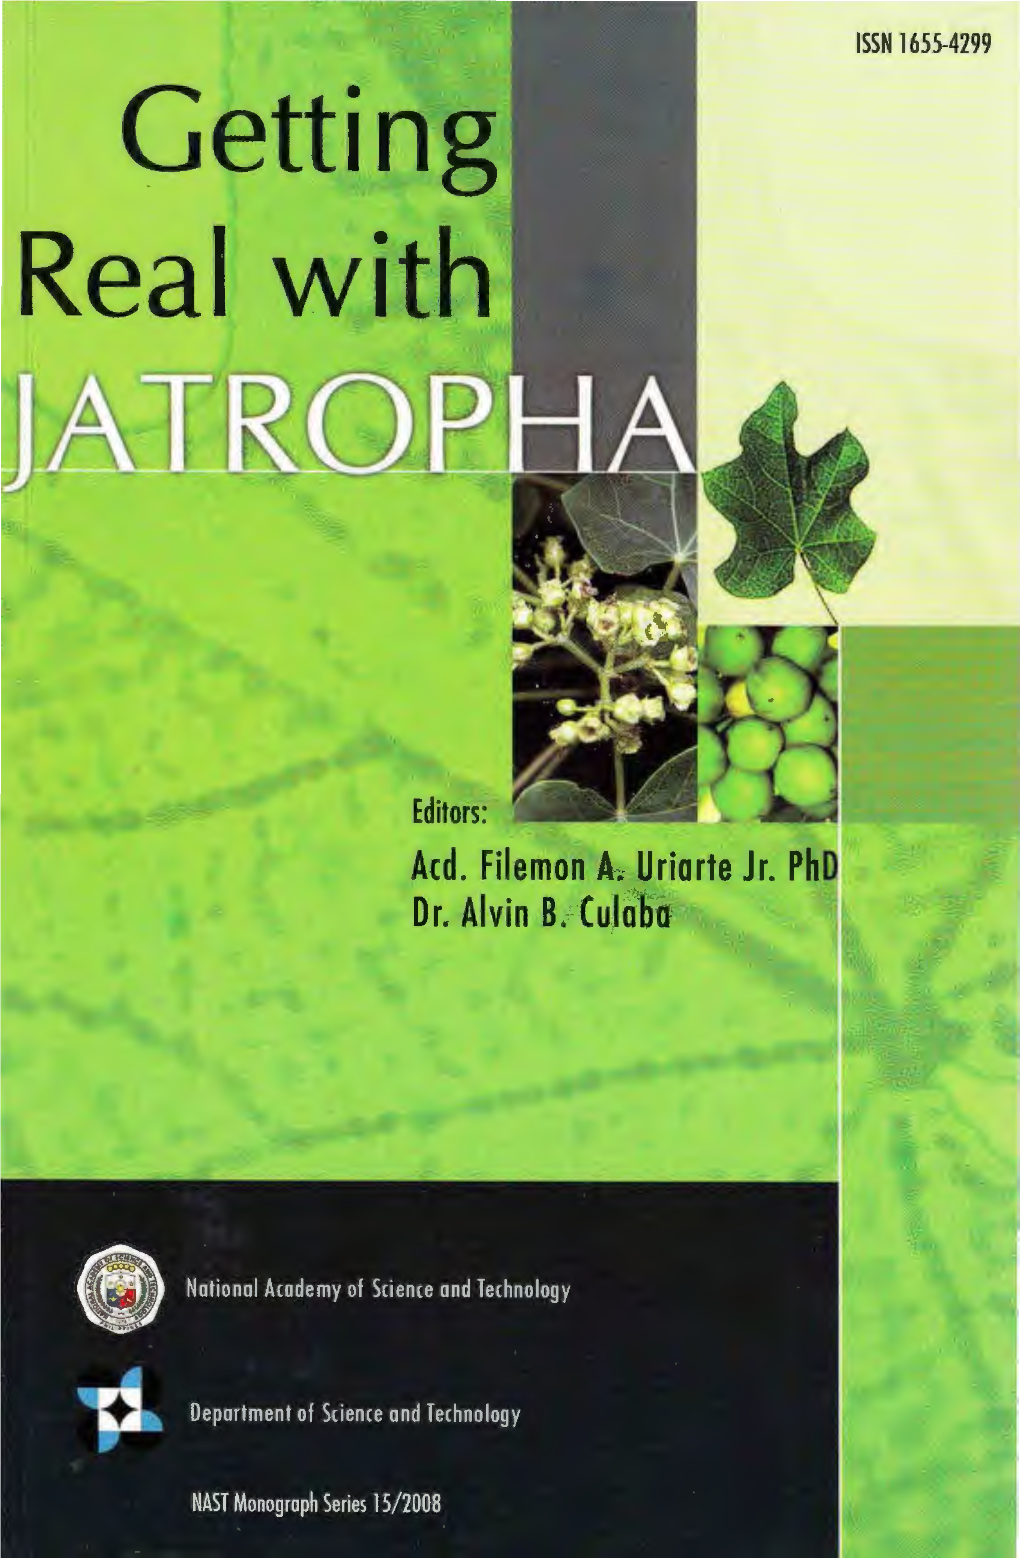 Getting Real with Jatropha